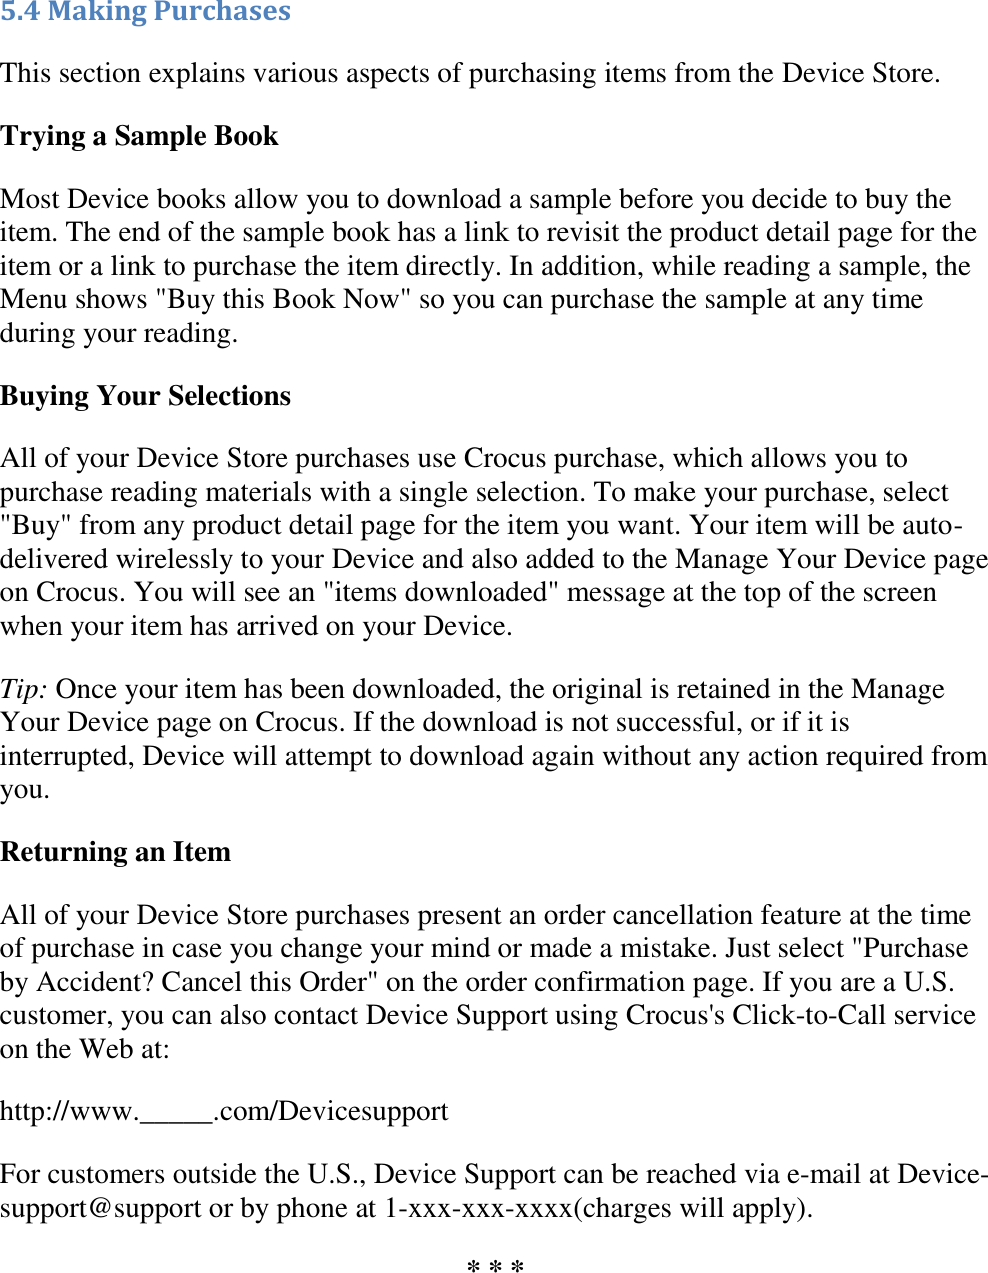   5.4 Making Purchases This section explains various aspects of purchasing items from the Device Store. Trying a Sample Book Most Device books allow you to download a sample before you decide to buy the item. The end of the sample book has a link to revisit the product detail page for the item or a link to purchase the item directly. In addition, while reading a sample, the Menu shows &quot;Buy this Book Now&quot; so you can purchase the sample at any time during your reading. Buying Your Selections All of your Device Store purchases use Crocus purchase, which allows you to purchase reading materials with a single selection. To make your purchase, select &quot;Buy&quot; from any product detail page for the item you want. Your item will be auto-delivered wirelessly to your Device and also added to the Manage Your Device page on Crocus. You will see an &quot;items downloaded&quot; message at the top of the screen when your item has arrived on your Device. Tip: Once your item has been downloaded, the original is retained in the Manage Your Device page on Crocus. If the download is not successful, or if it is interrupted, Device will attempt to download again without any action required from you. Returning an Item All of your Device Store purchases present an order cancellation feature at the time of purchase in case you change your mind or made a mistake. Just select &quot;Purchase by Accident? Cancel this Order&quot; on the order confirmation page. If you are a U.S. customer, you can also contact Device Support using Crocus&apos;s Click-to-Call service on the Web at: http://www._____.com/Devicesupport For customers outside the U.S., Device Support can be reached via e-mail at Device-support@support or by phone at 1-xxx-xxx-xxxx(charges will apply). * * * 